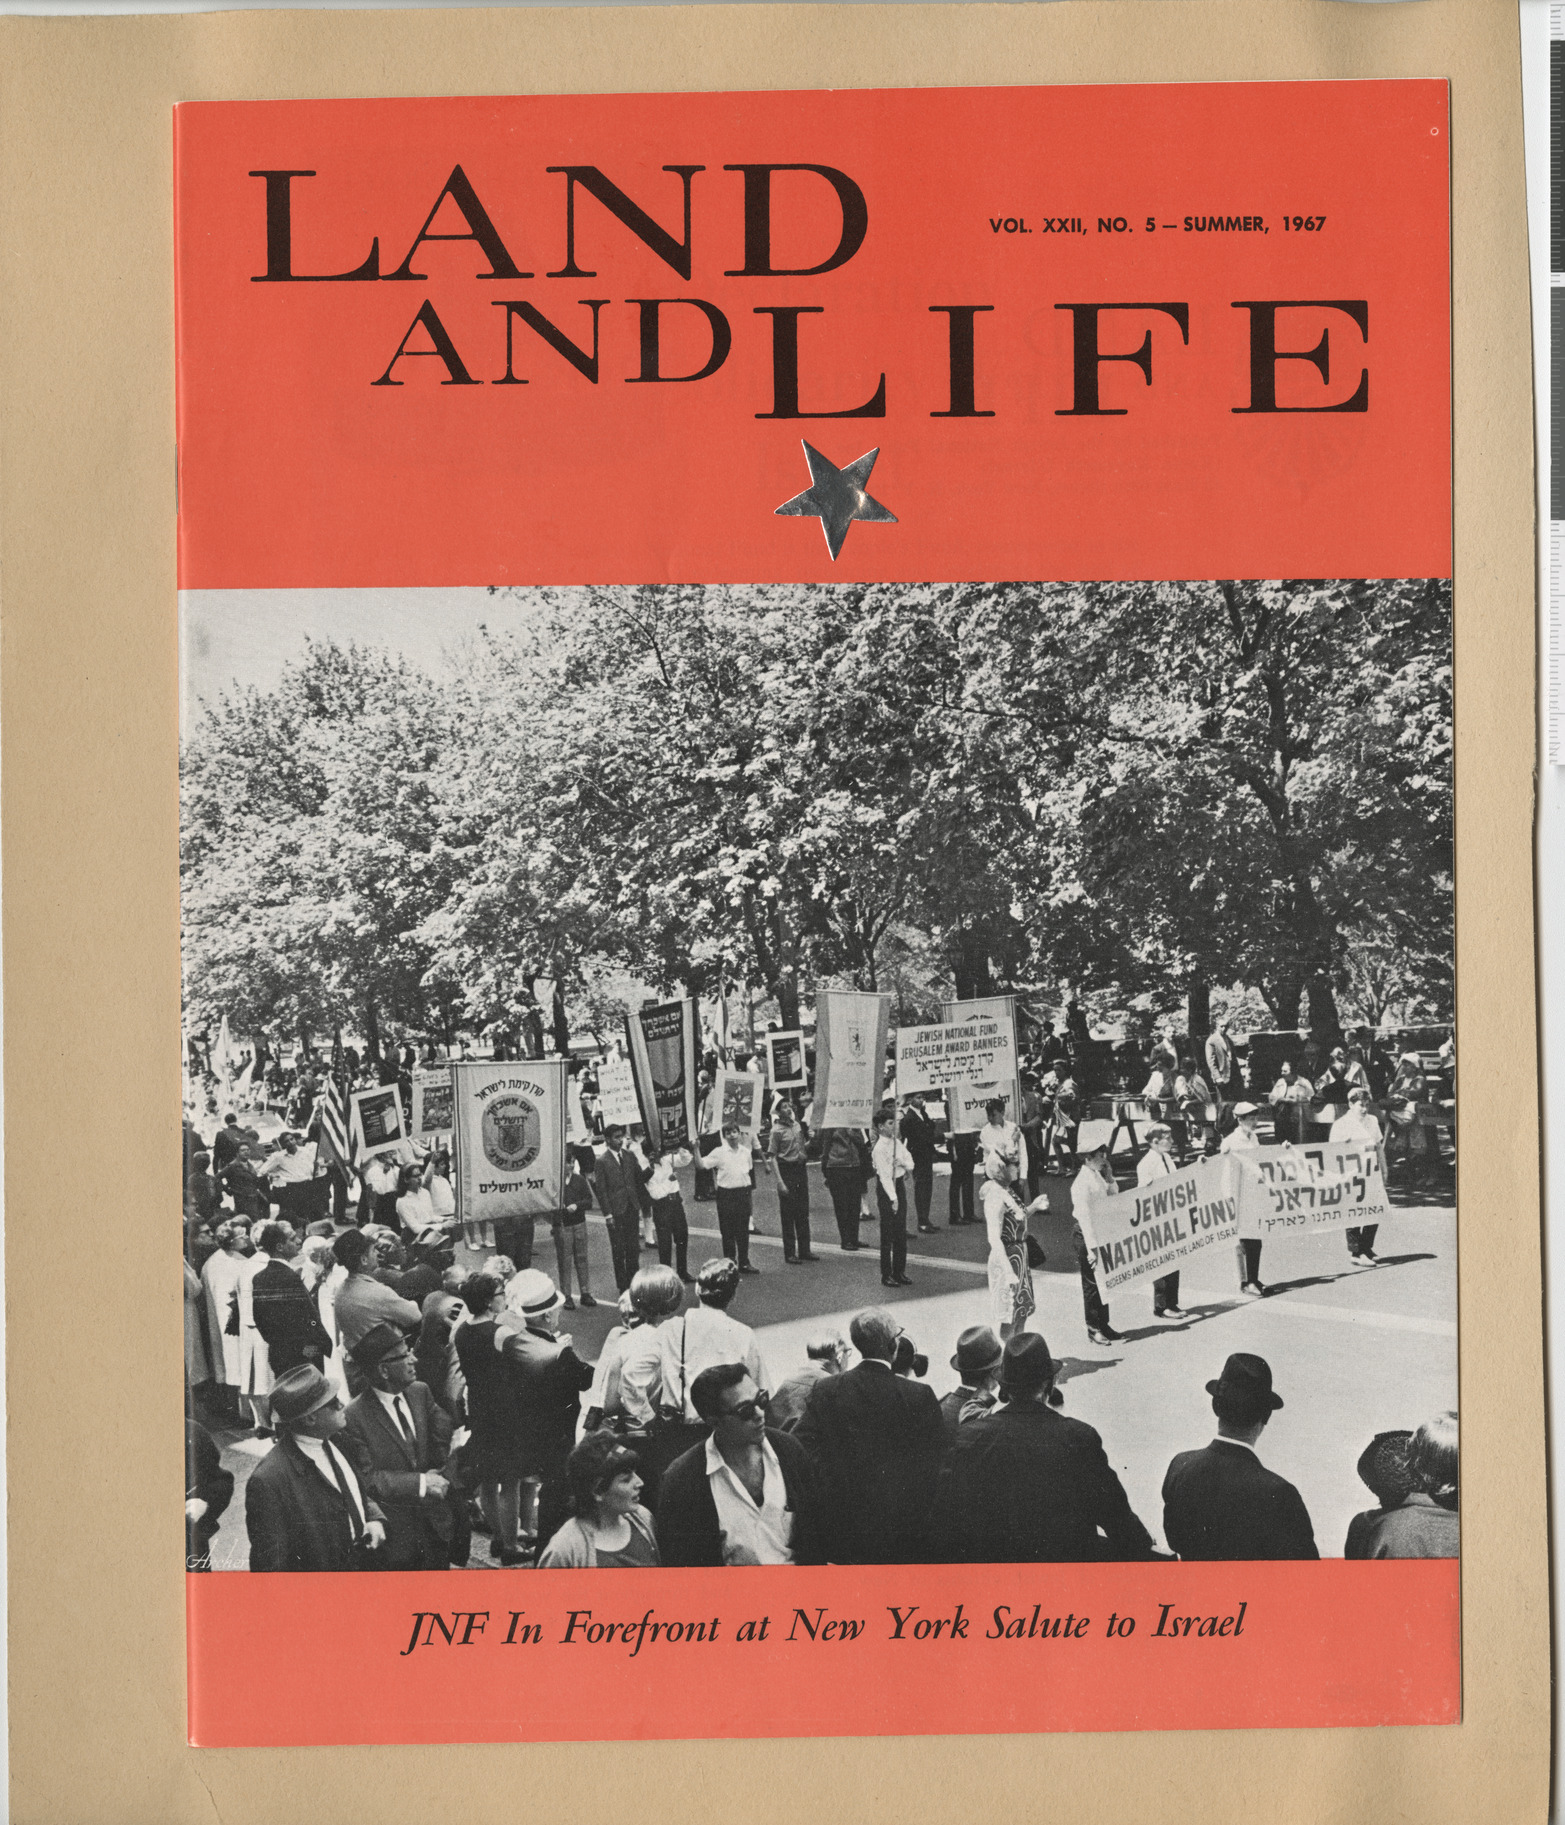 Magazine, Land and Life, Vol. XXII, No. 5, Summer 1967, cover